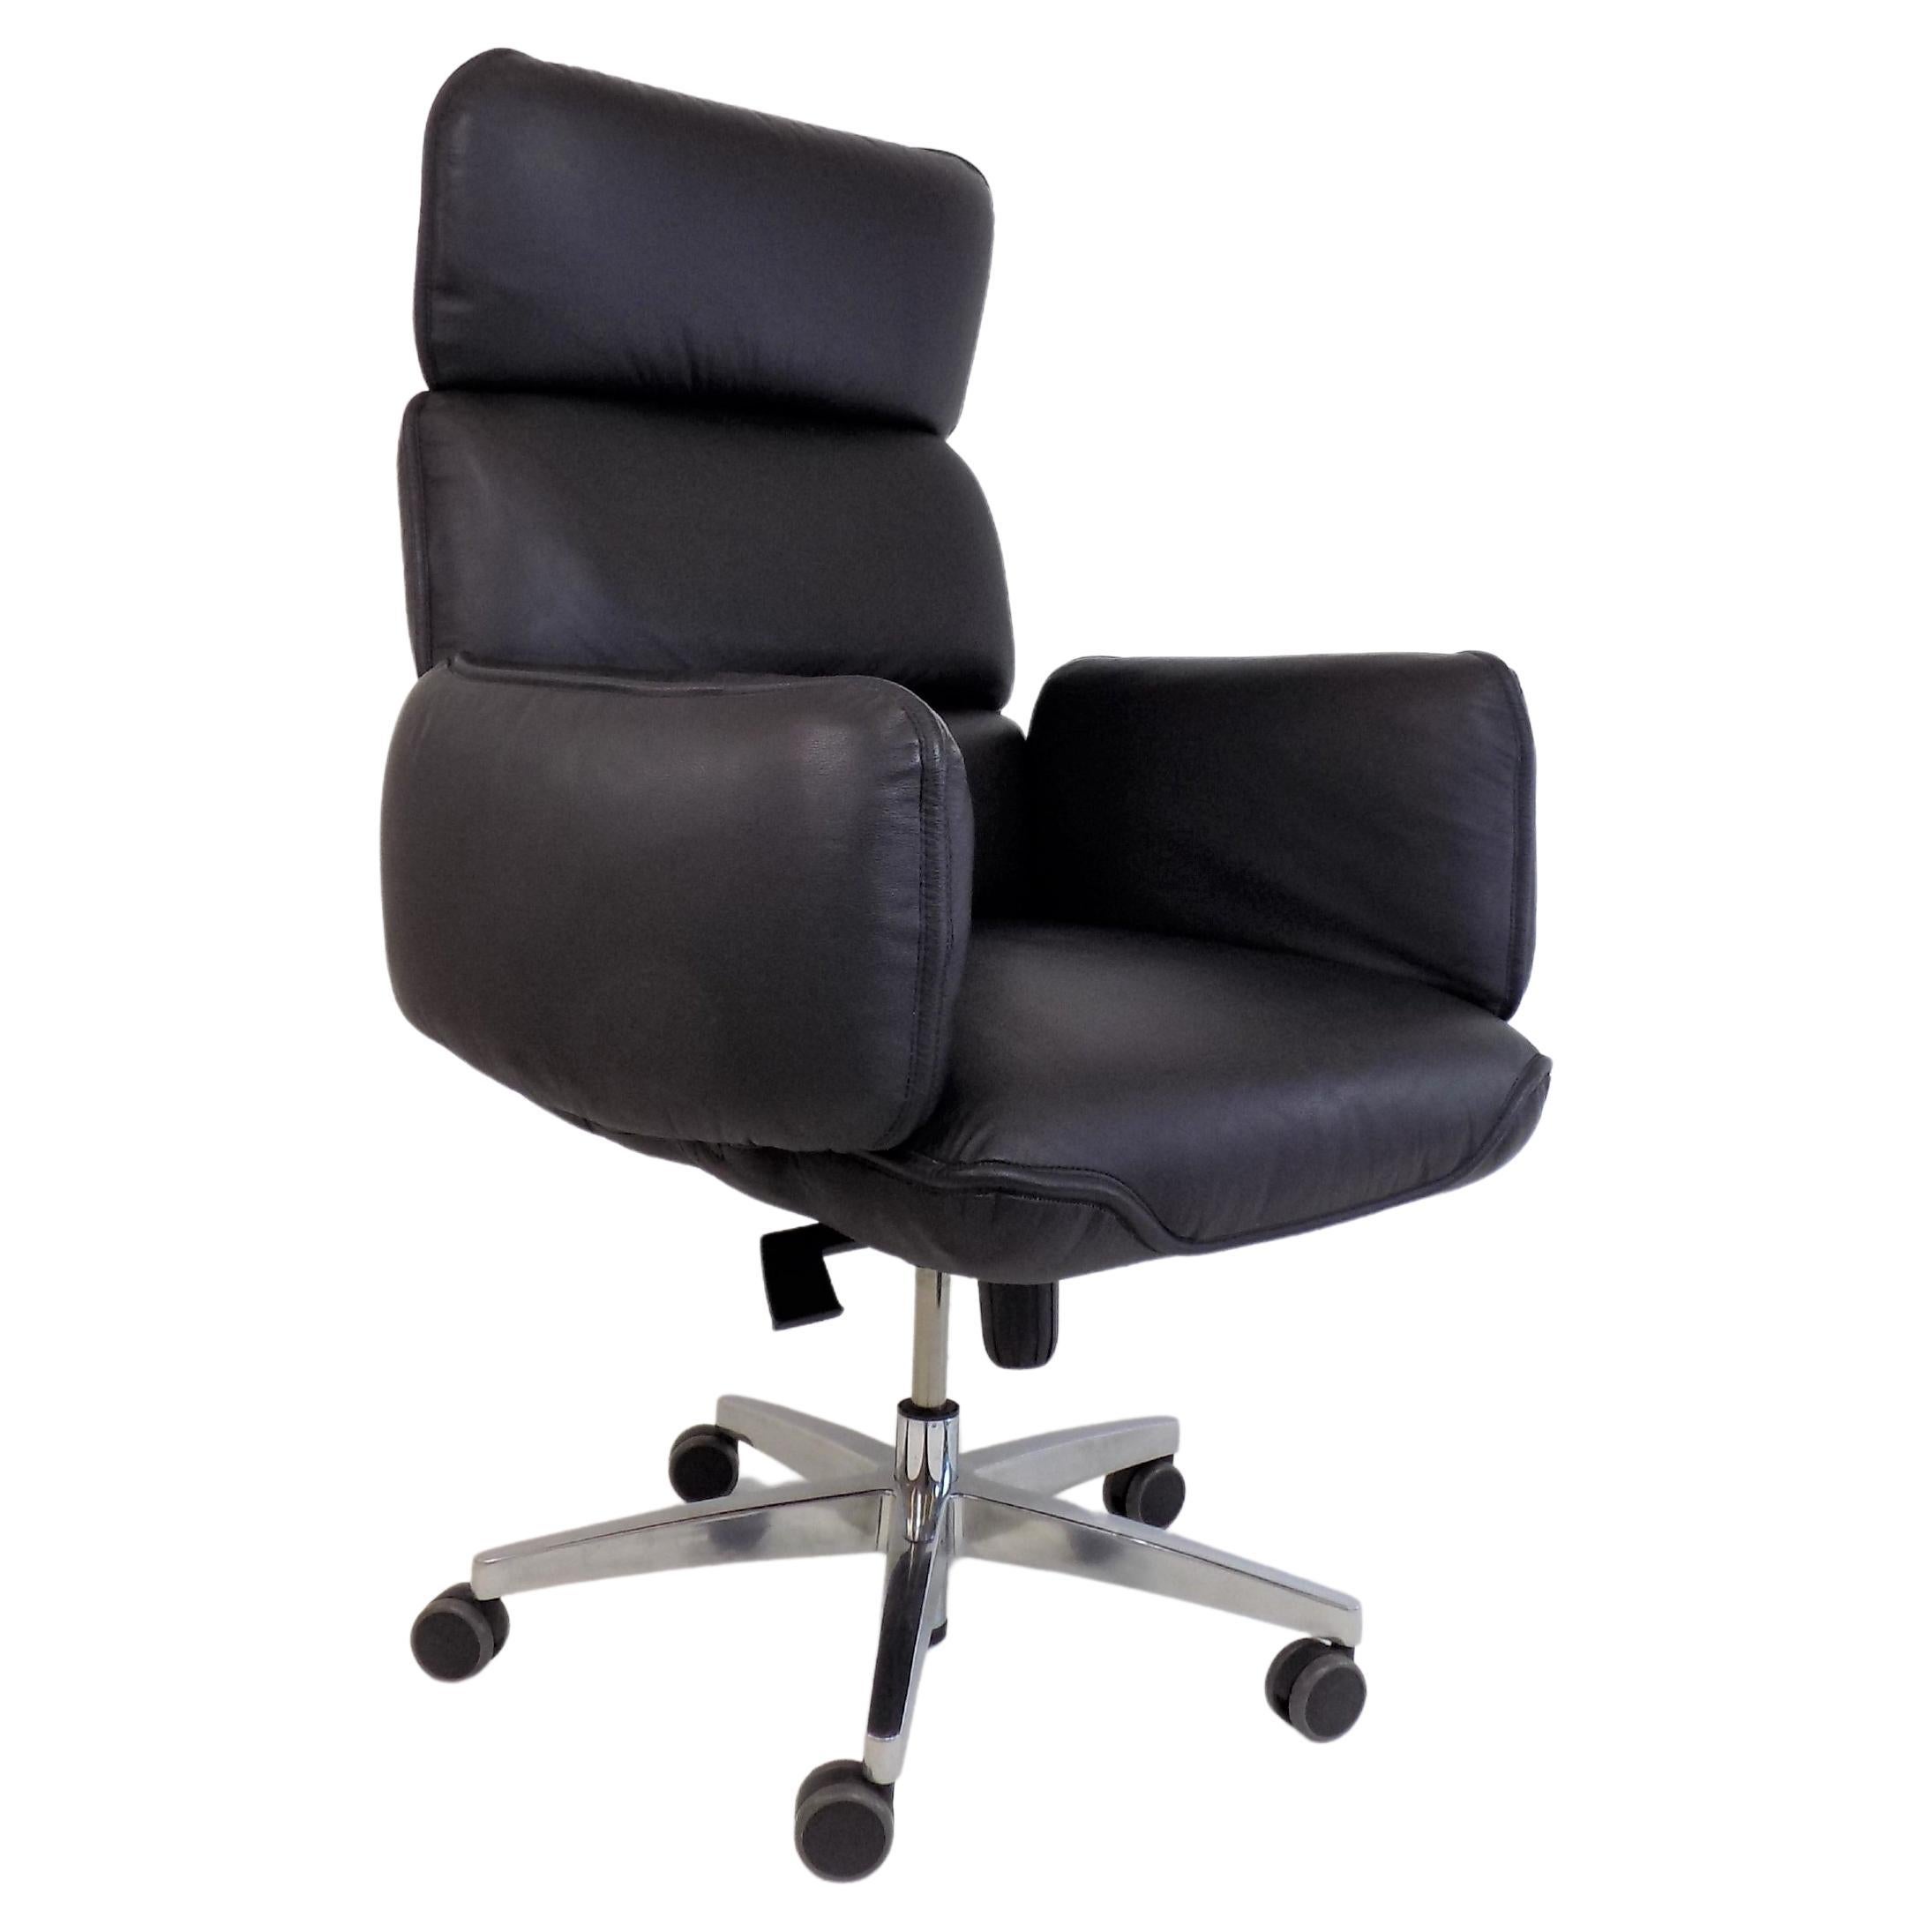 Otto Zapf Leather Office Chair for Topstar